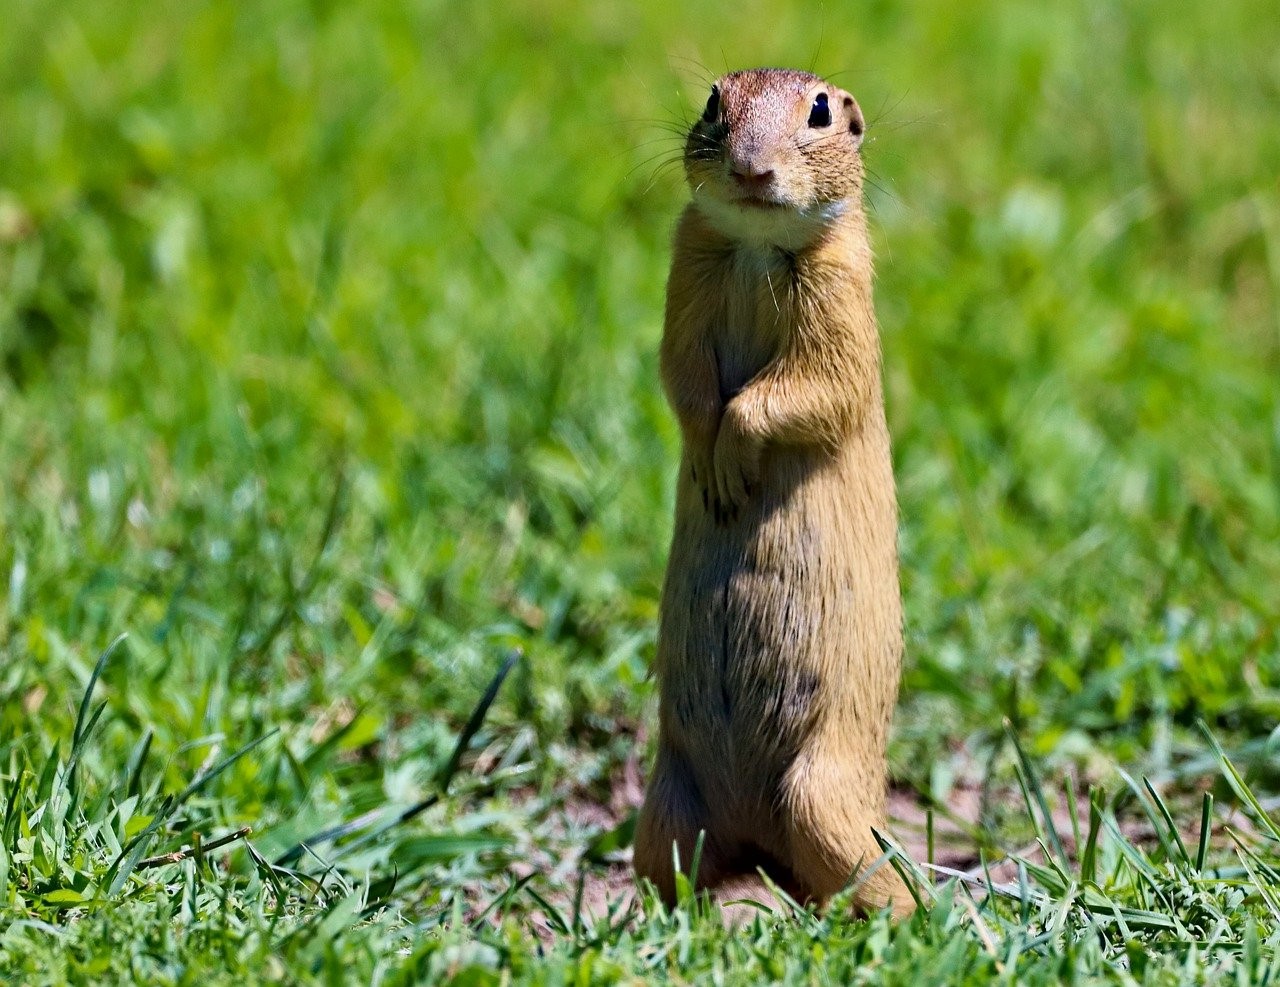 image of a gopher